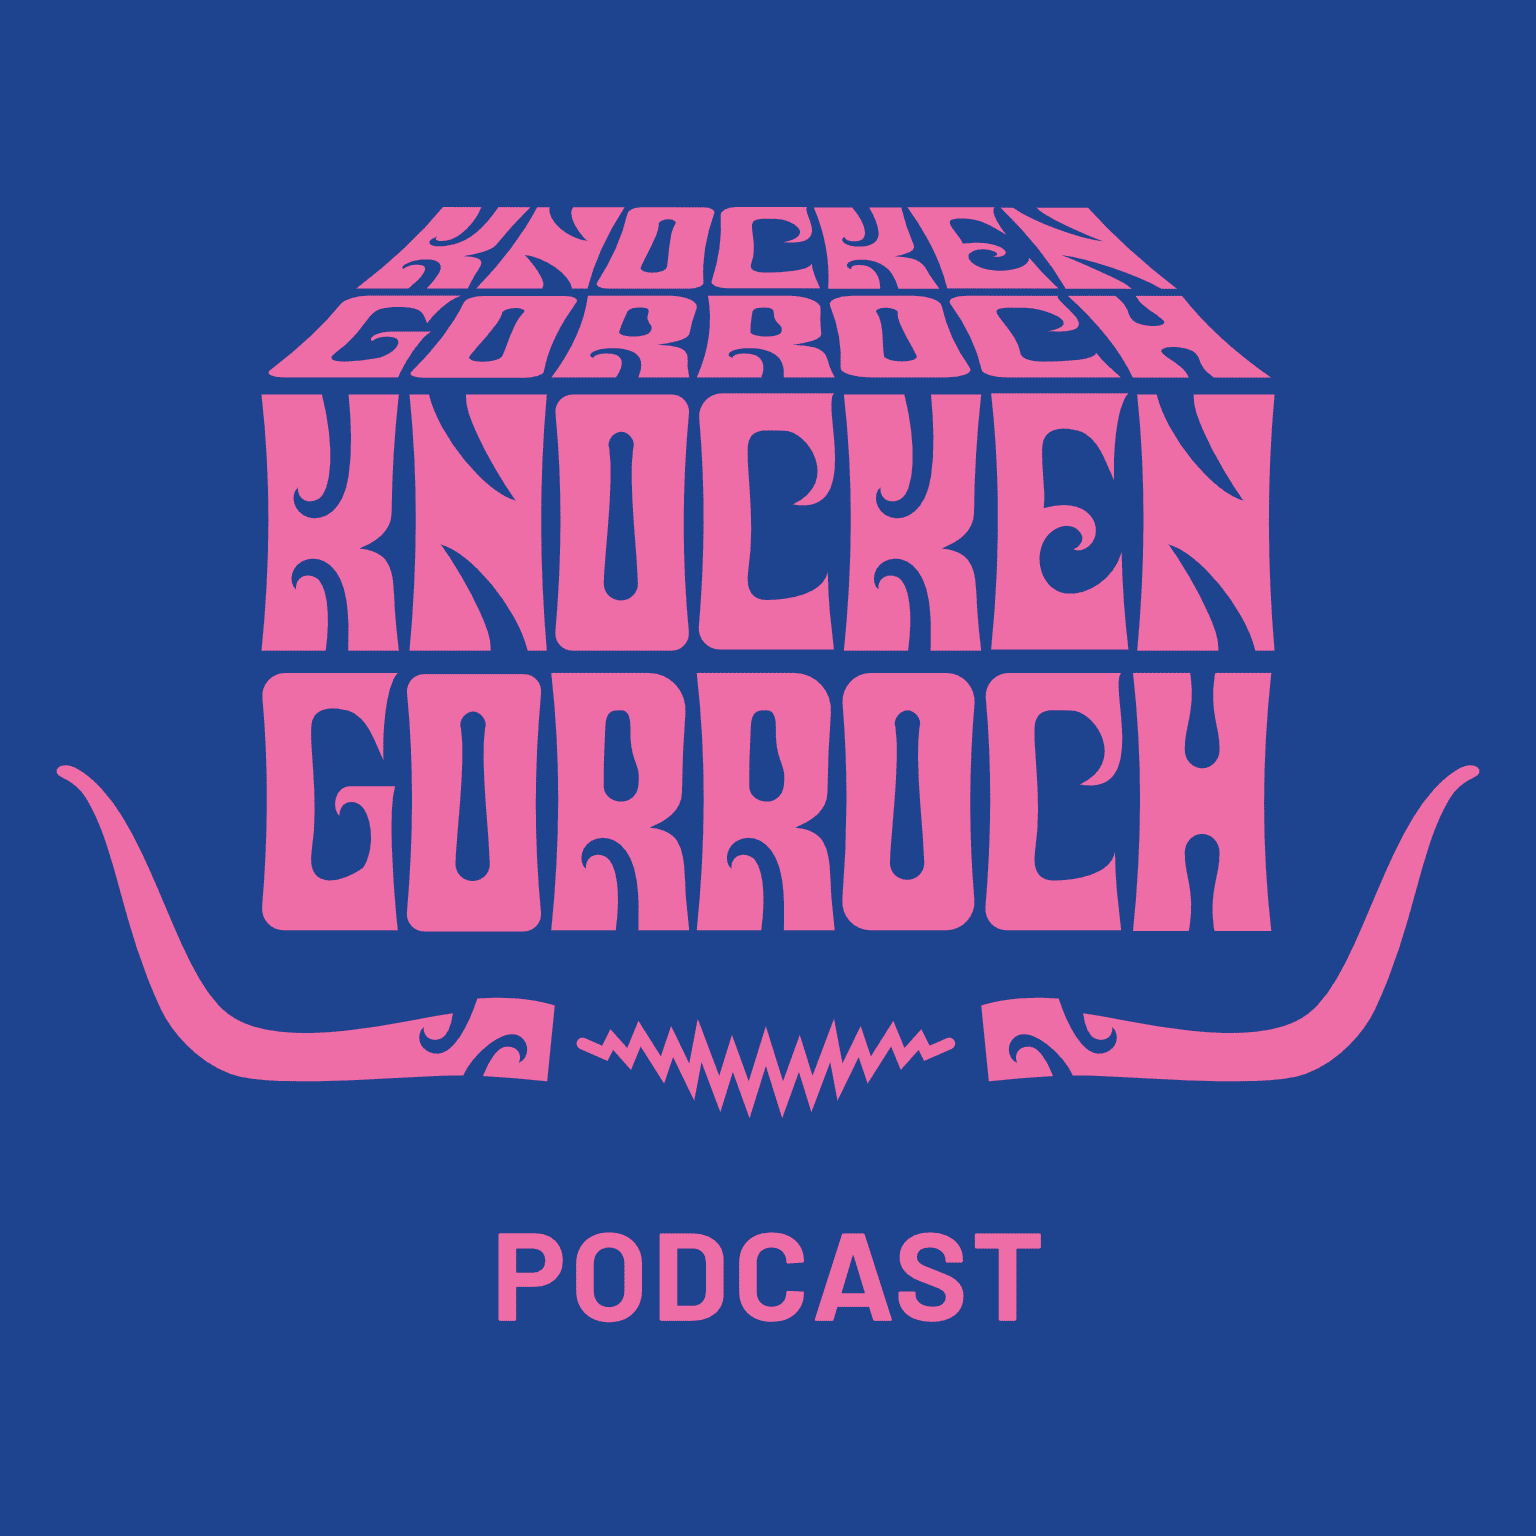 Knockengorroch podcast cover image (logo and title)